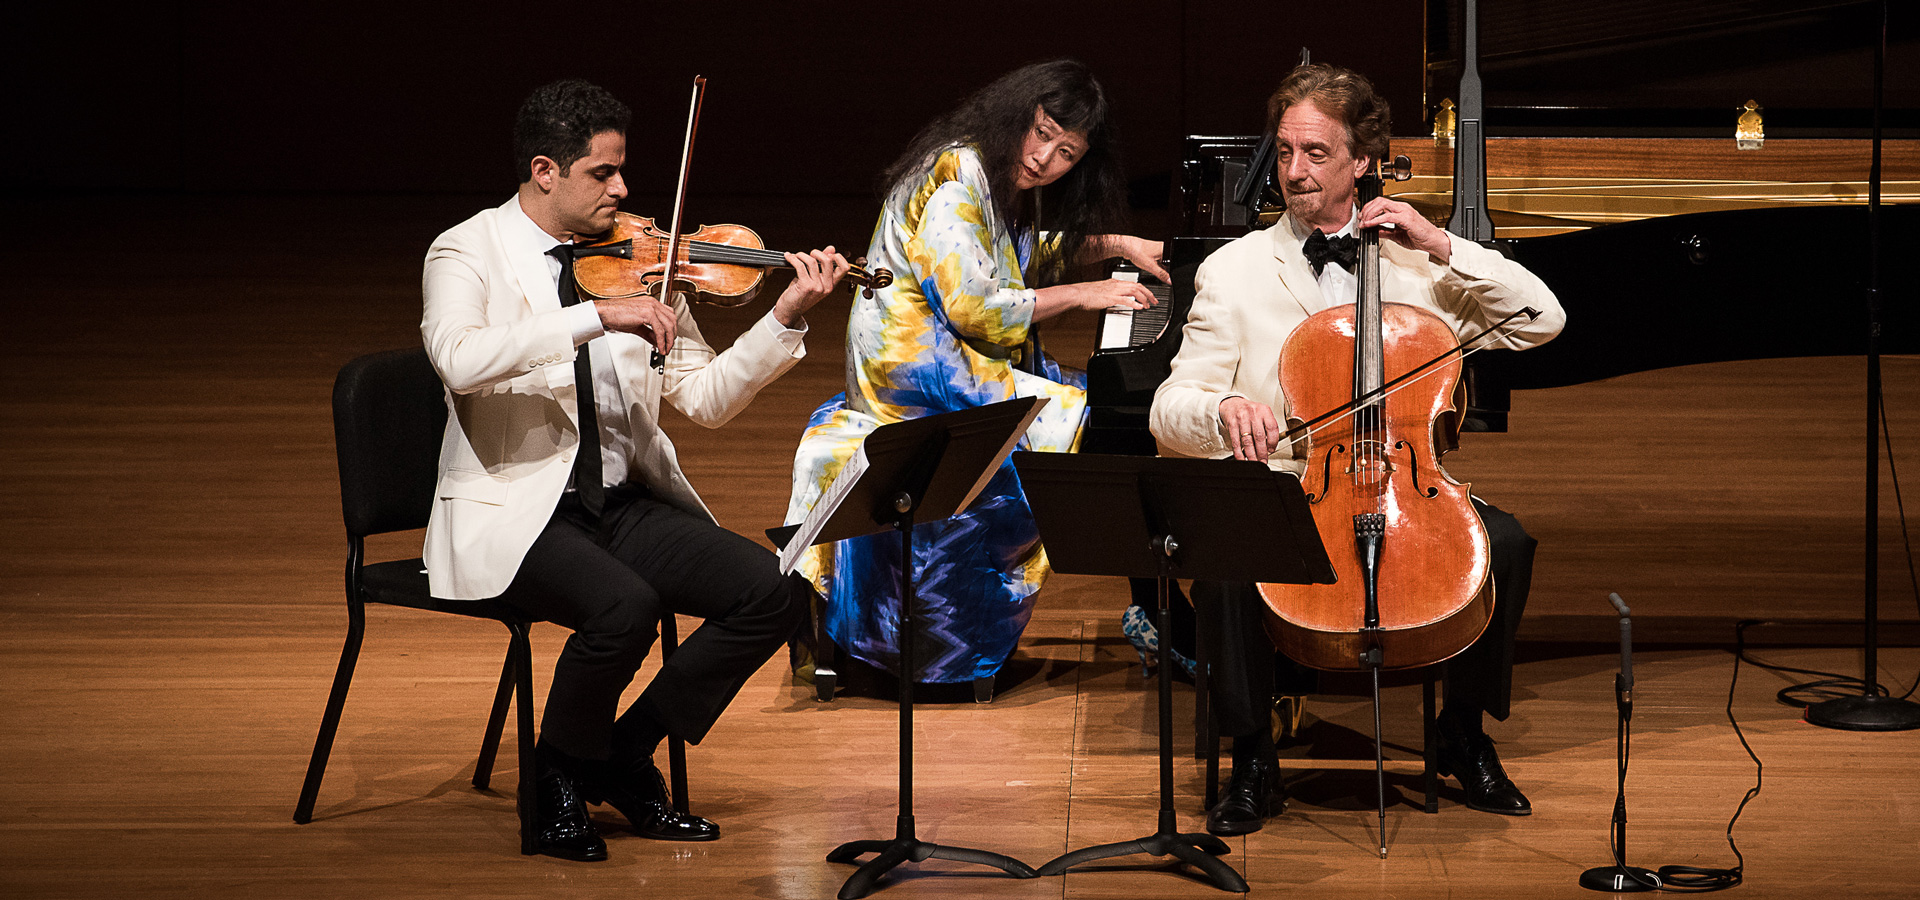 Three musicians performing seated together on stage; Wu Han on piano, David Finckel on cello, and Arnaud Saussman on violin.